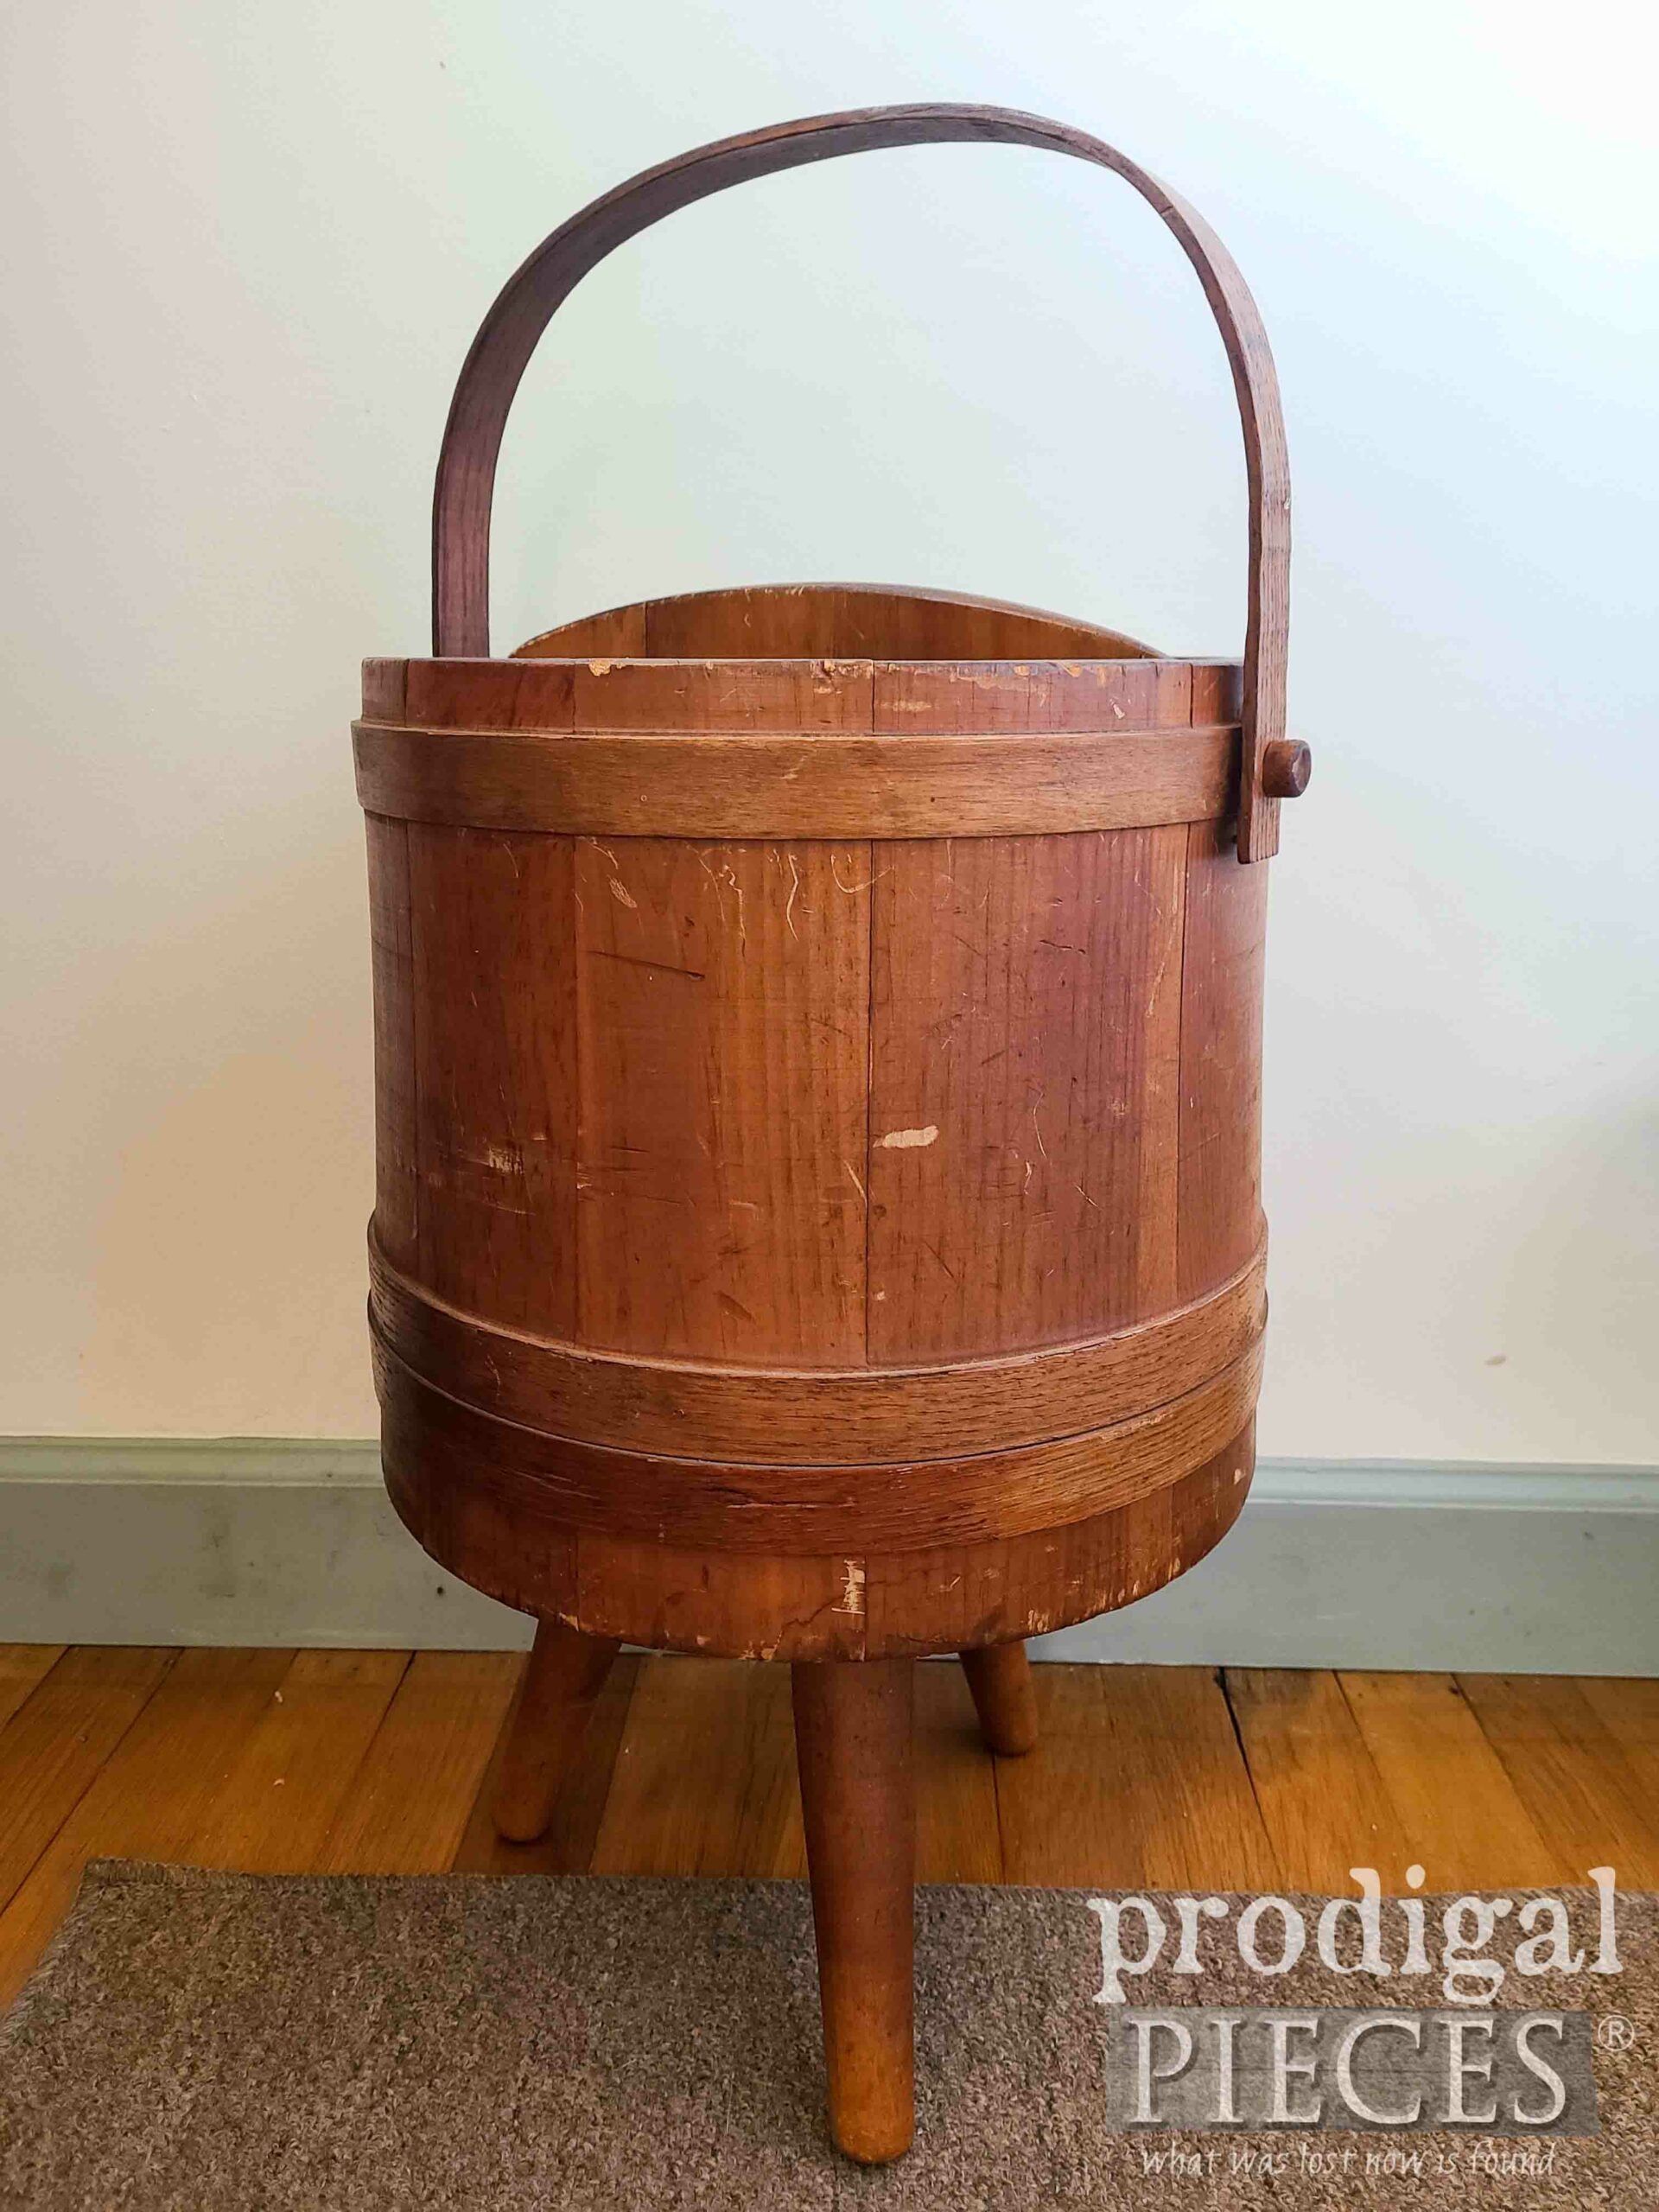 Vintage Firkin Sewing Bucket Makeover Before | prodigalpieces.com #prodigalpieces